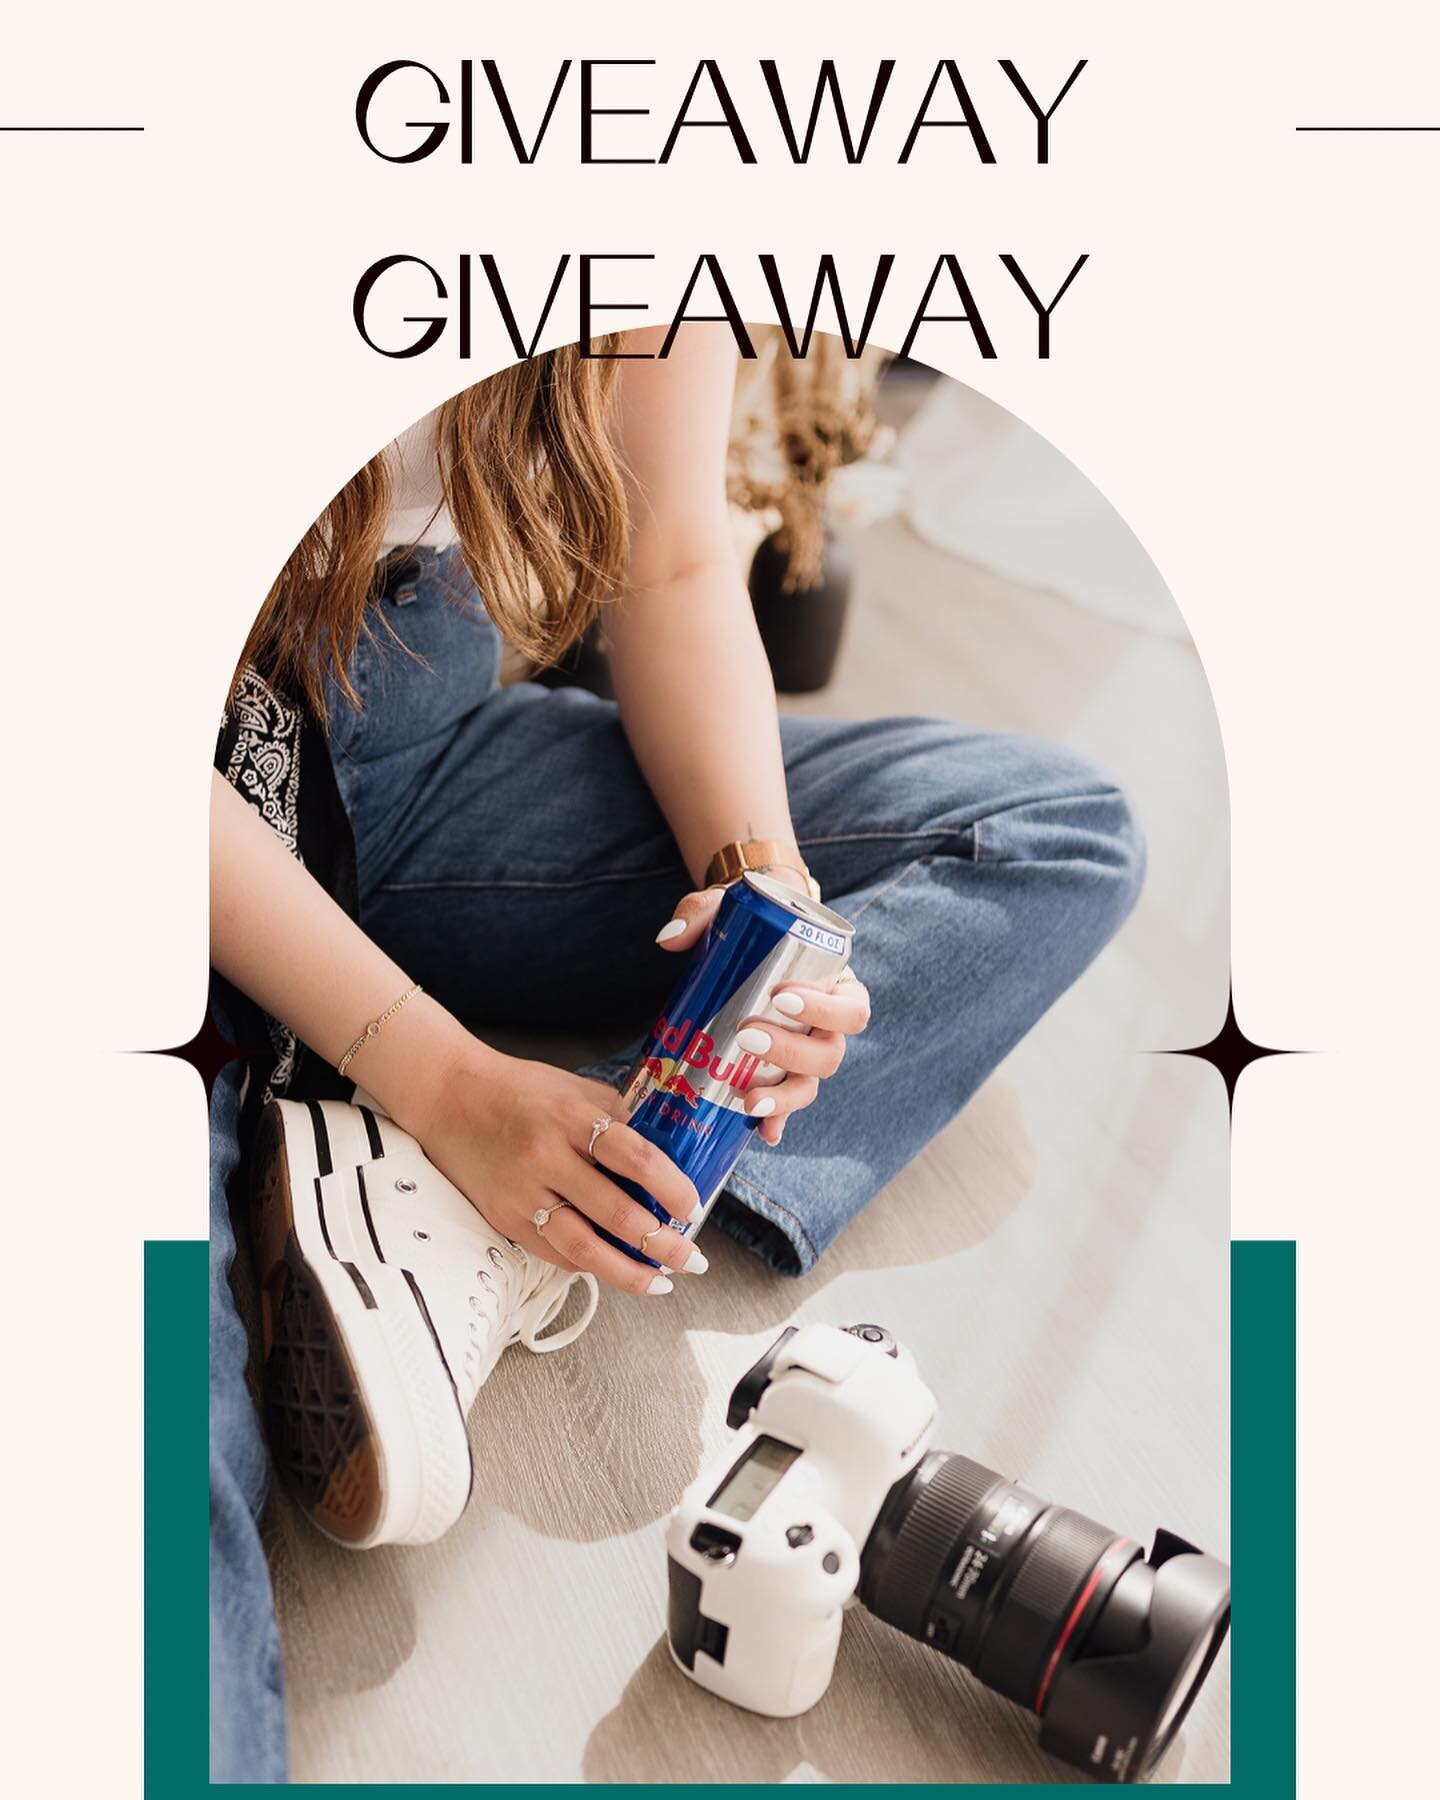 📸✨ Portland Event Giveaway! ✨📸

One person will win :

✨$150 off any @bubblesandtreatspnw Booking 
✨FREE 8ftBalloon Garland by @smallandmightyerp 
✨One 30min Mini Session with @graciebirkphoto 
✨Crumble Cookie Gift Card
✨Boutique Slippers
✨Bubbles 